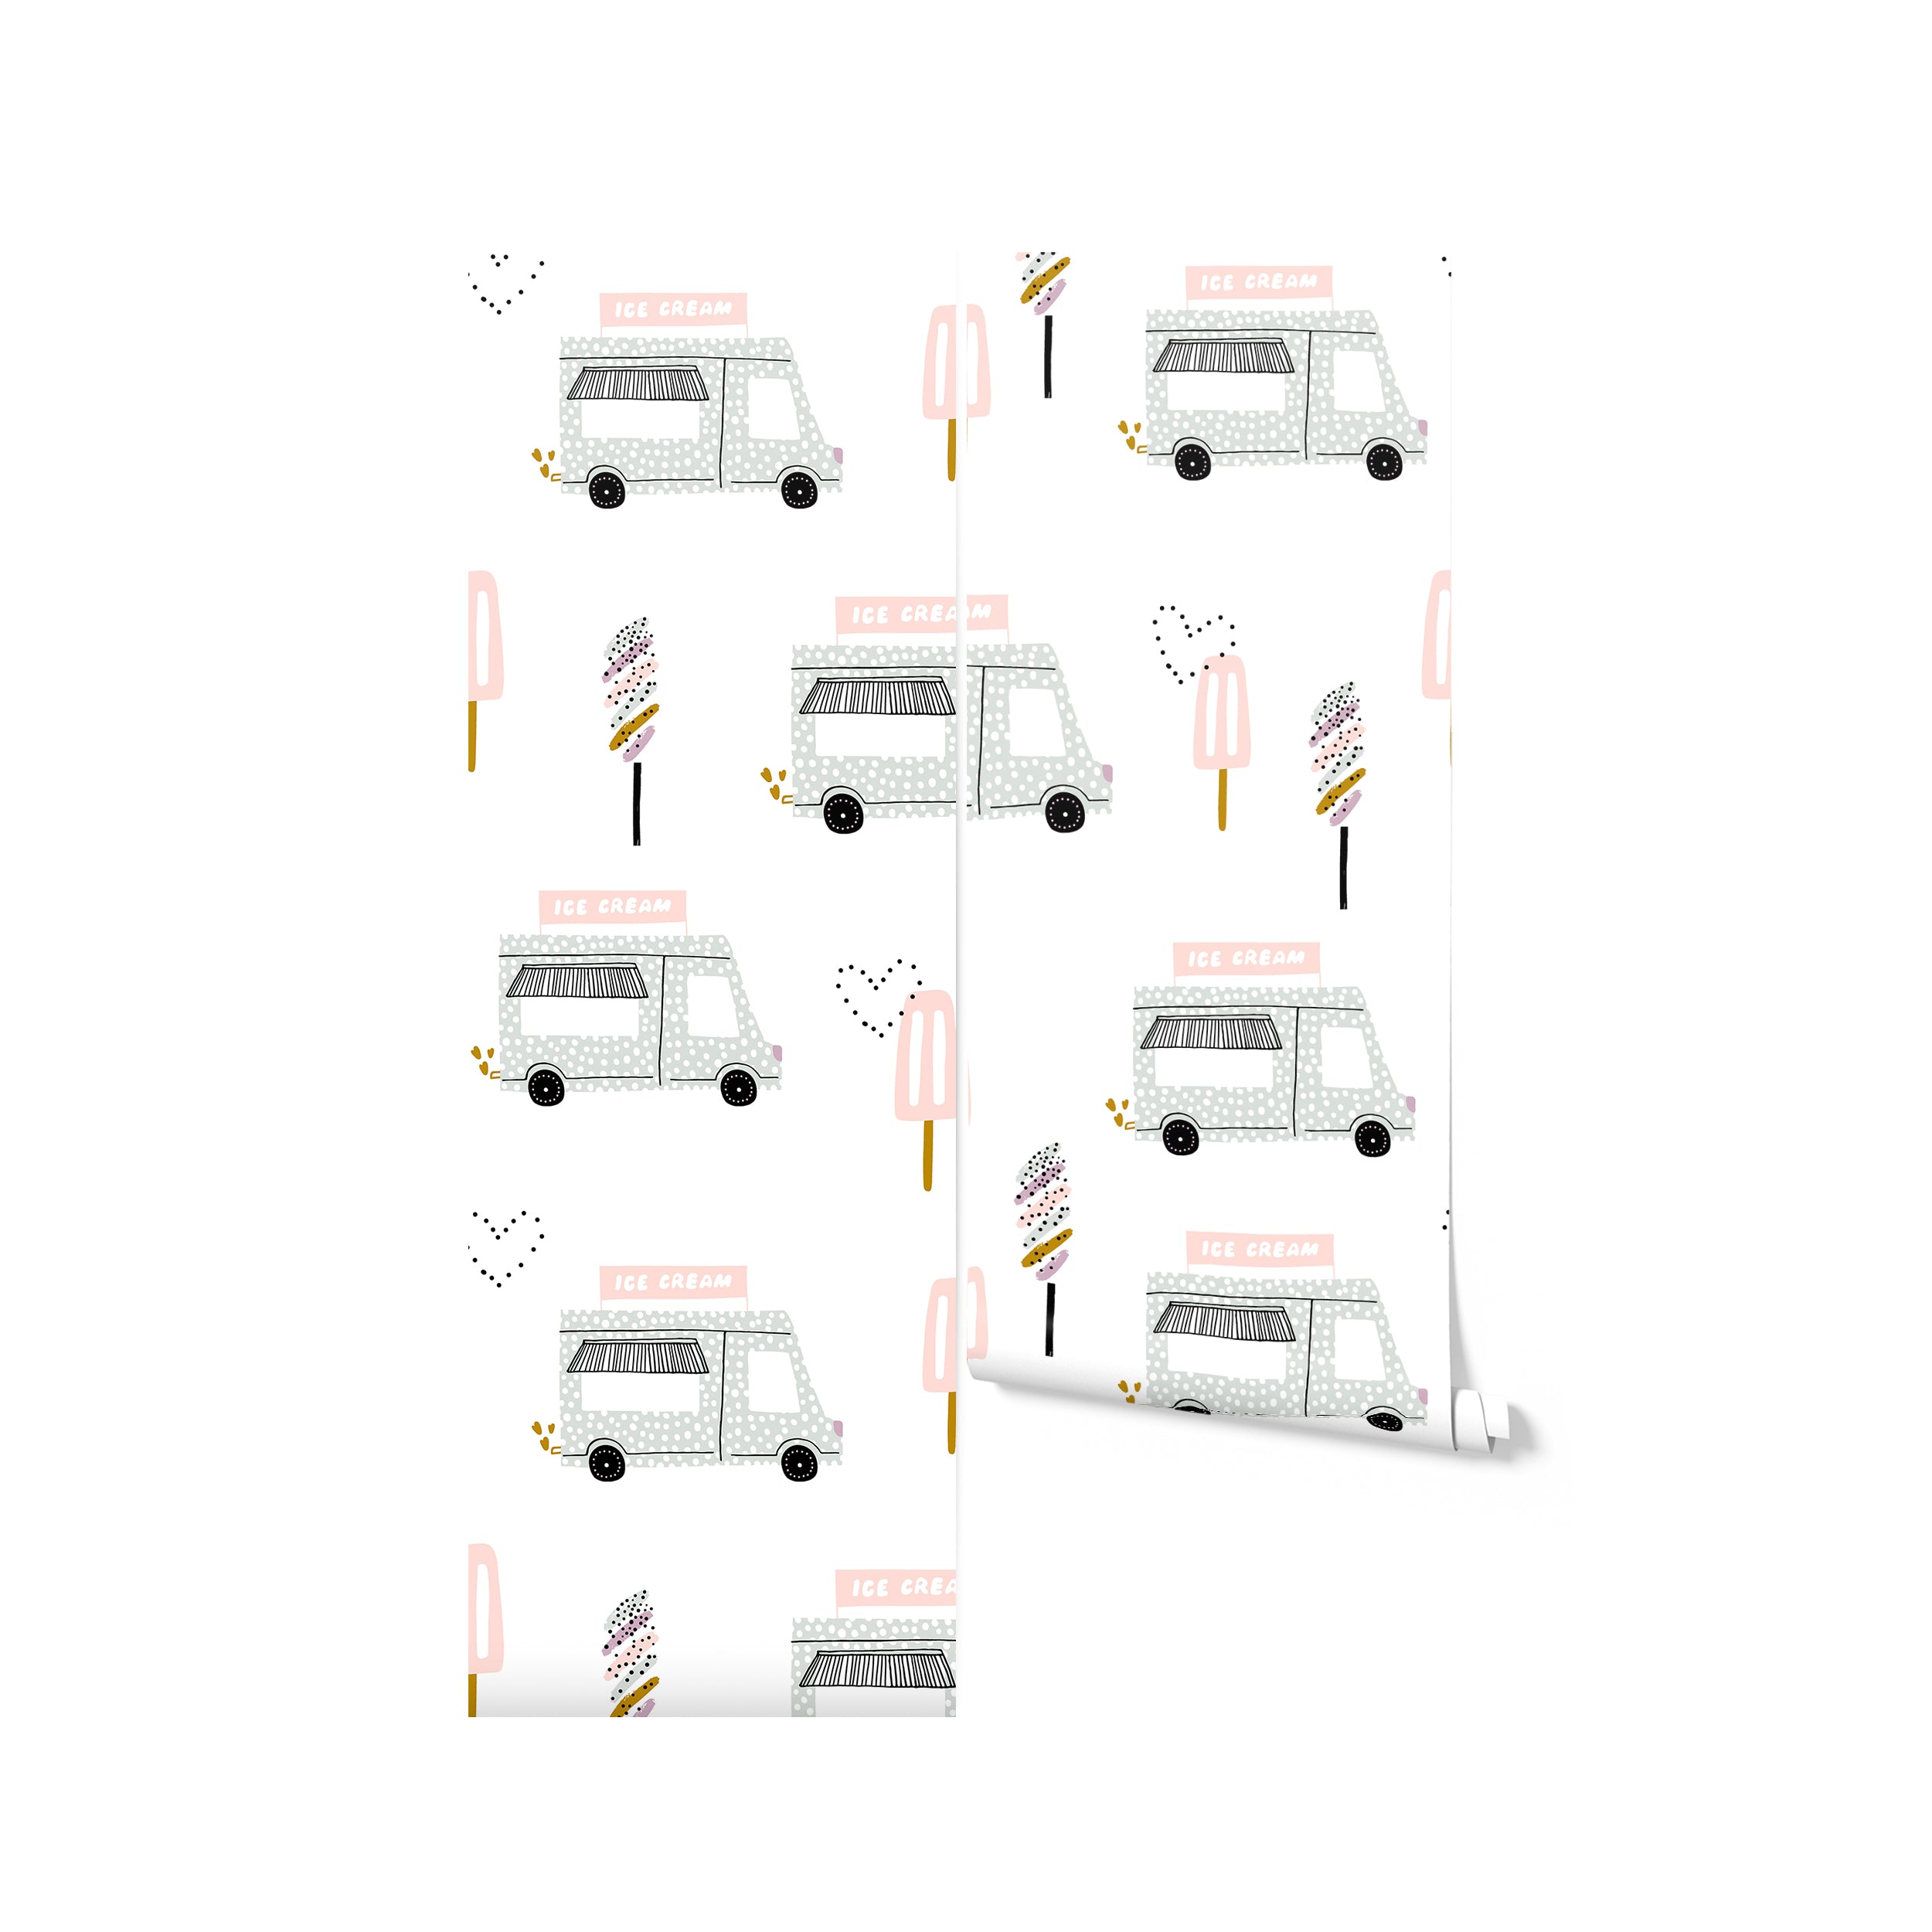 Roll of playful children’s wallpaper displaying a fun pattern of ice cream trucks and assorted ice creams on sticks, set against a white background with decorative dots, ideal for nursery or playroom walls.